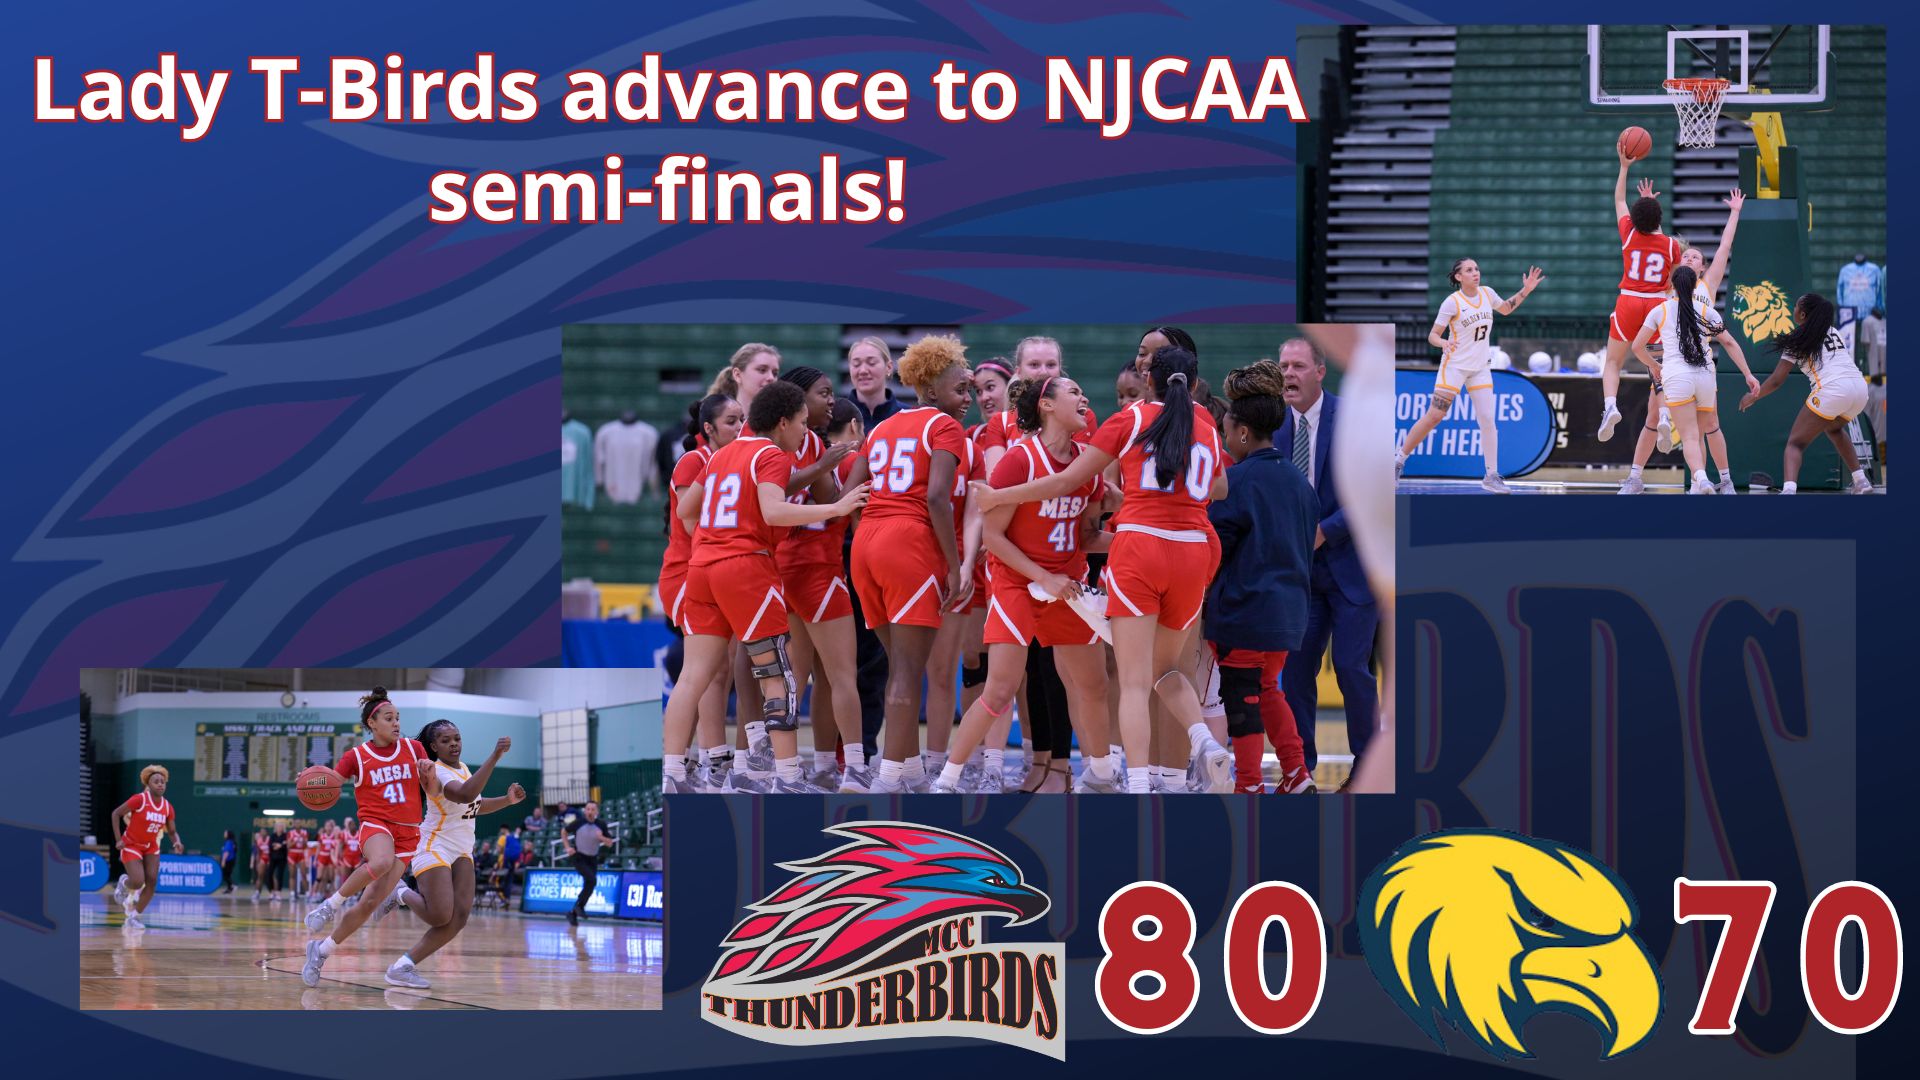 No. 6 Women's Basketball advances to NJCAA semi-finals after upsetting No. 3 Rock Valley College